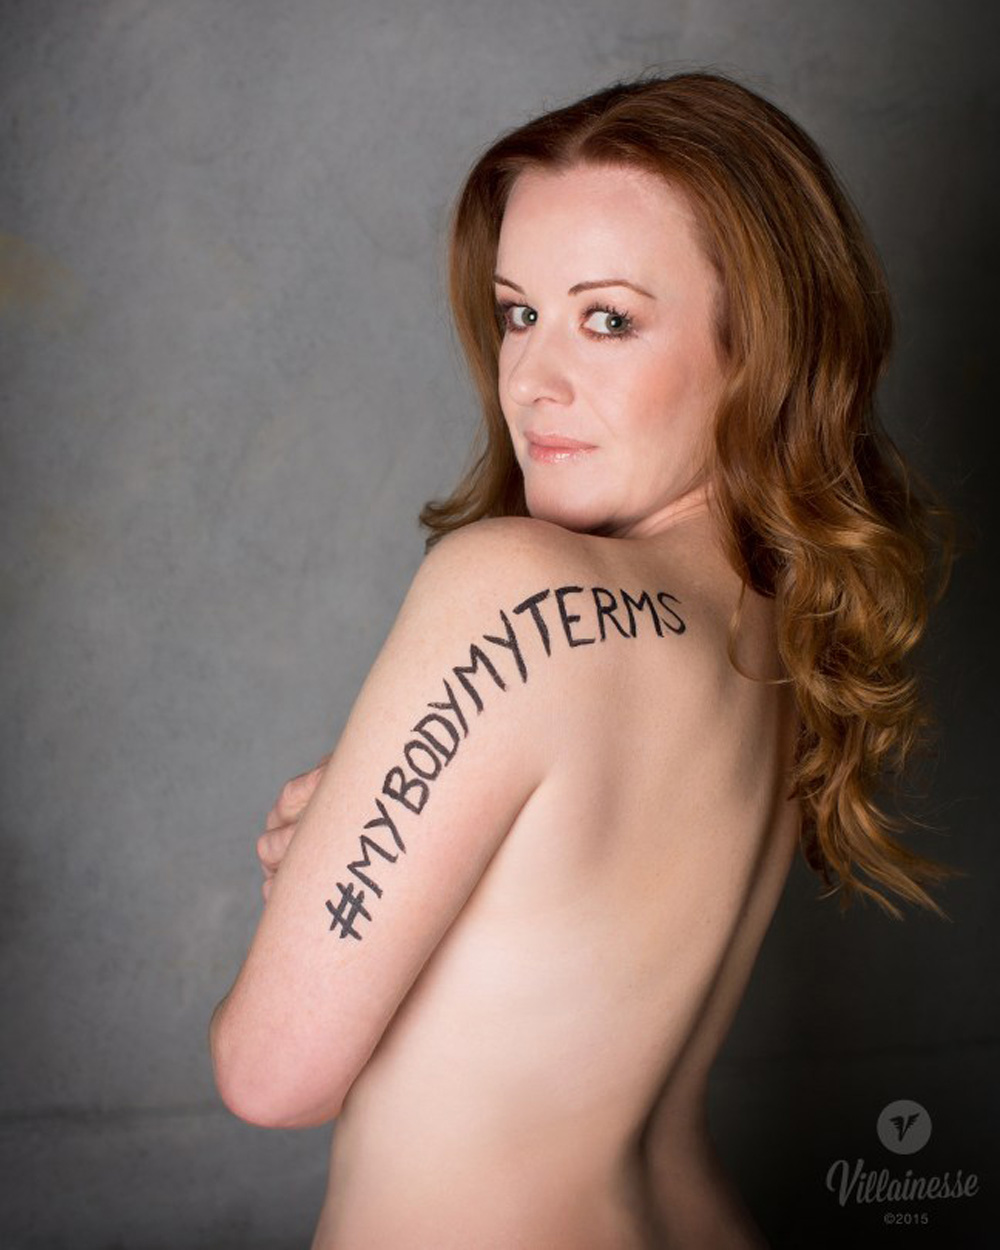 Nudist Terms - Fashion Quarterly | NZers rally together for #MyBodyMyTerms